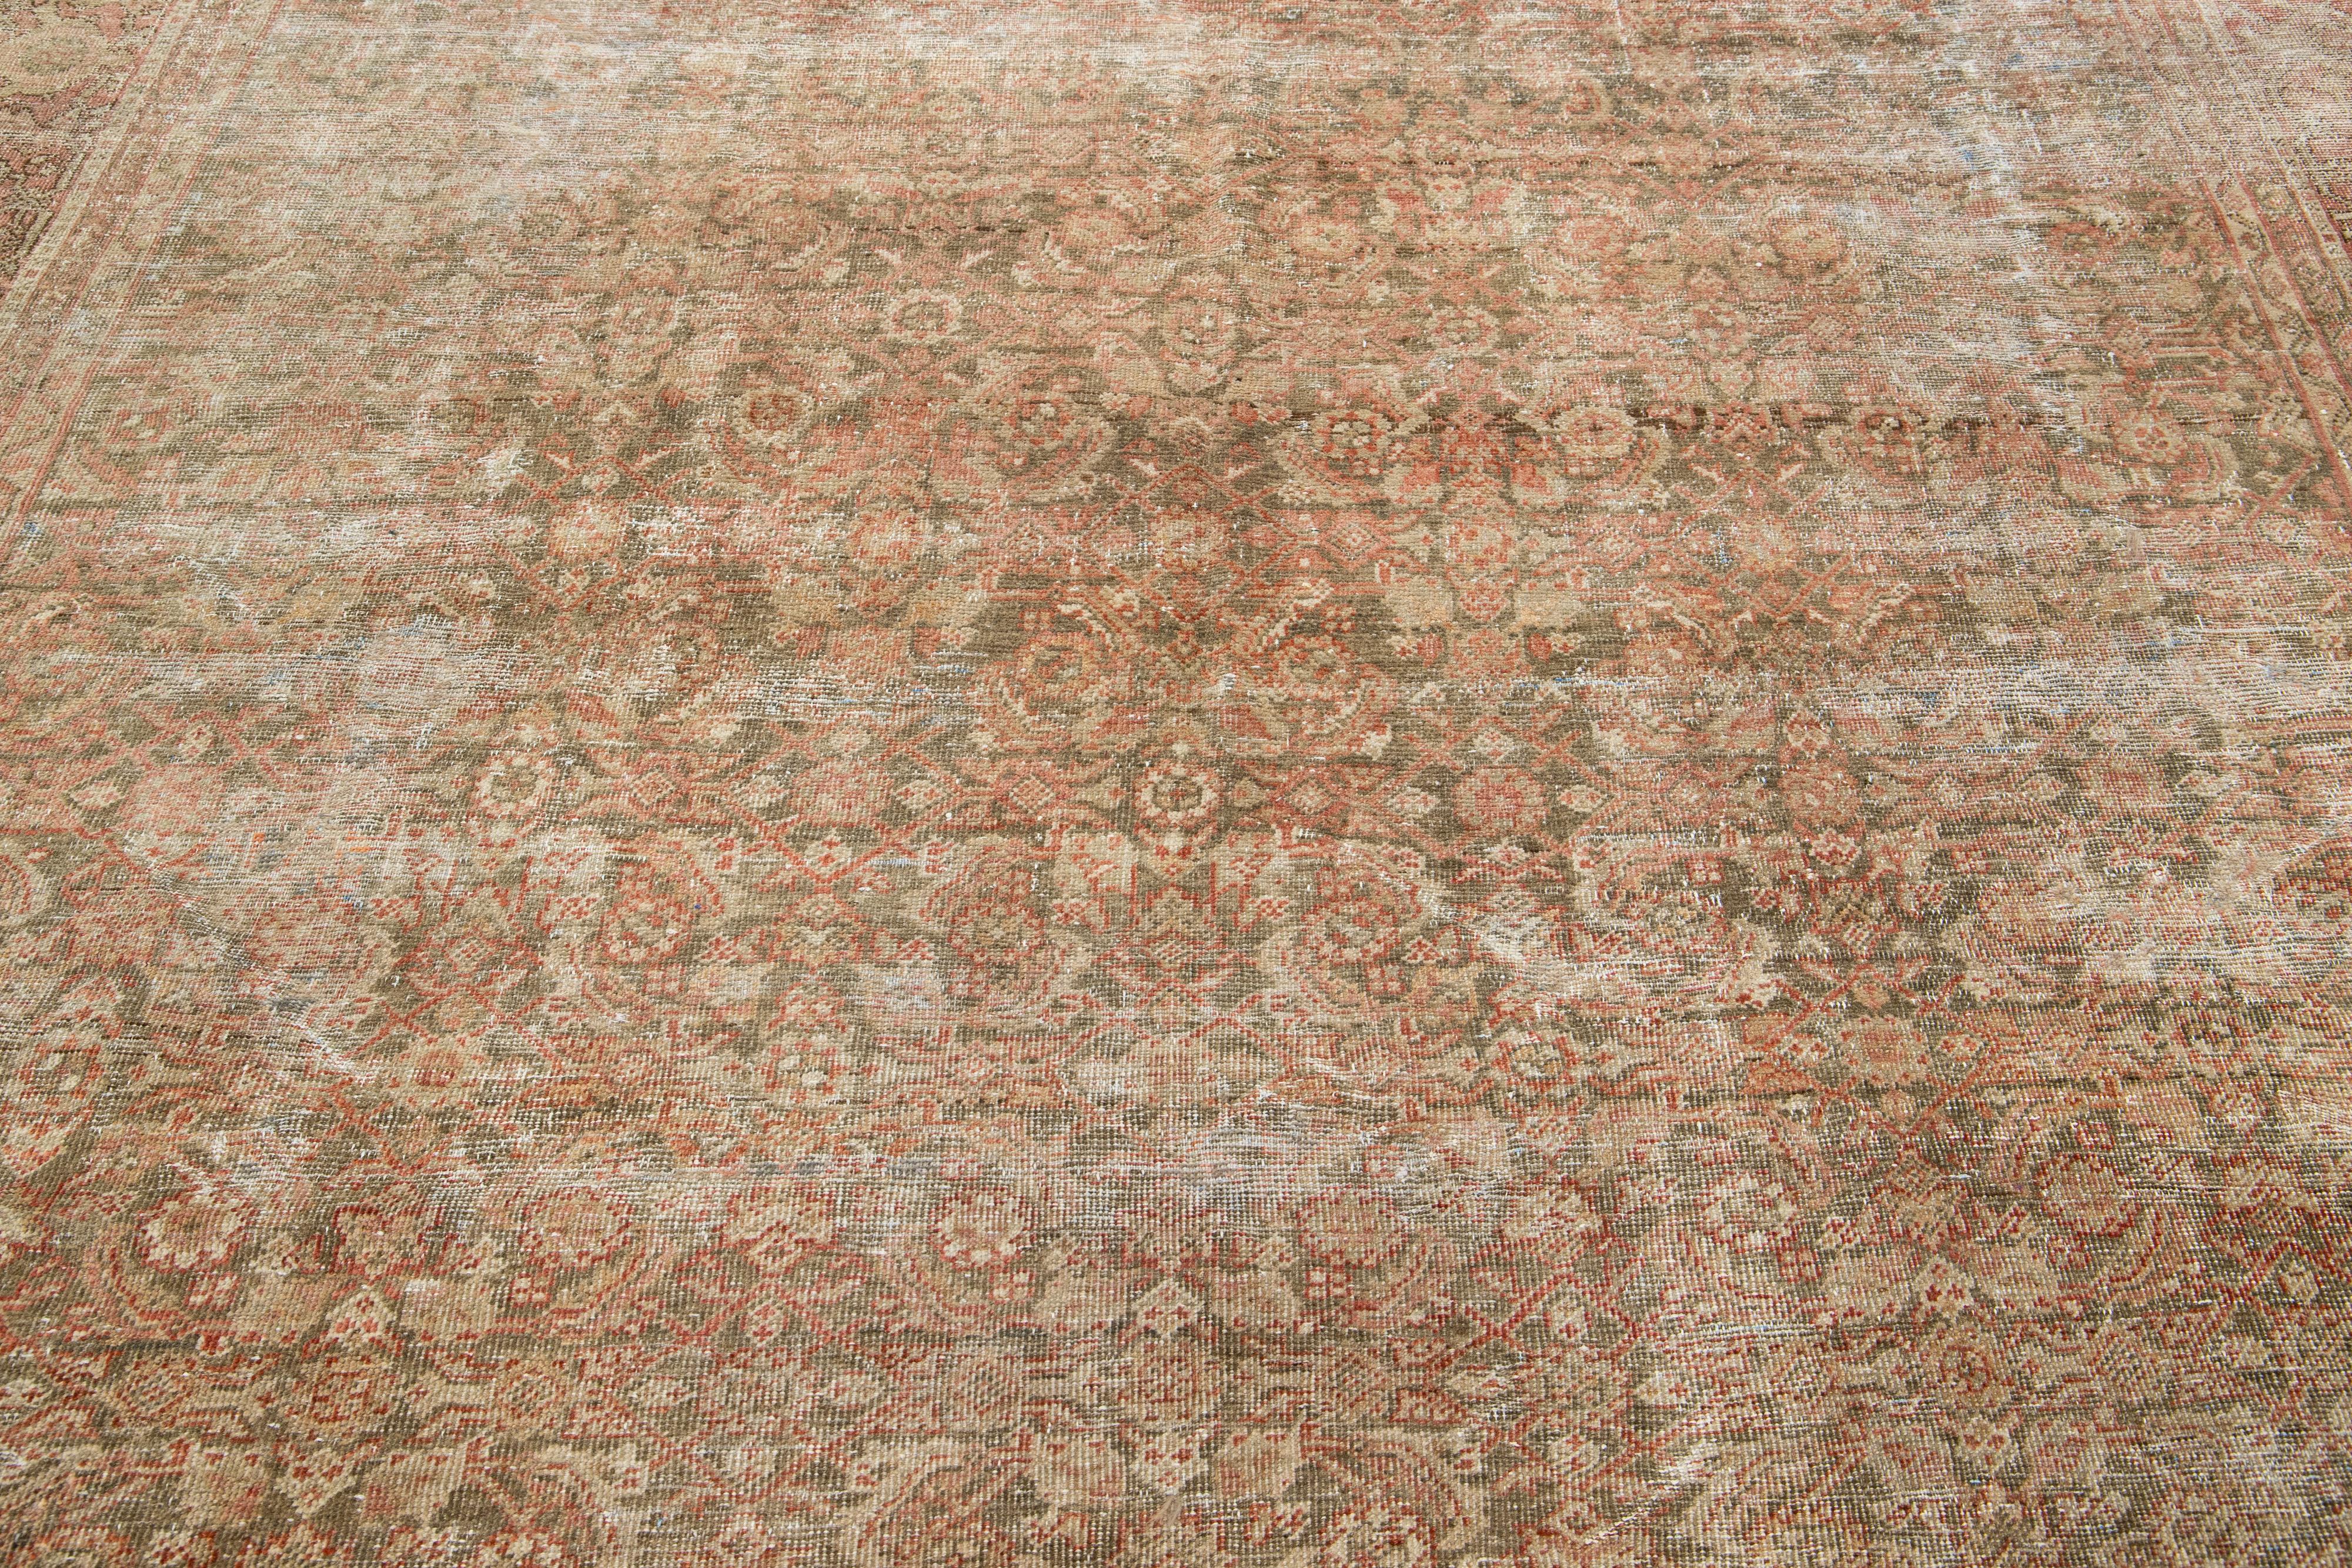 Antique Persian Tabriz Wool Rug with Rust Allover Design from the 1910s For Sale 1